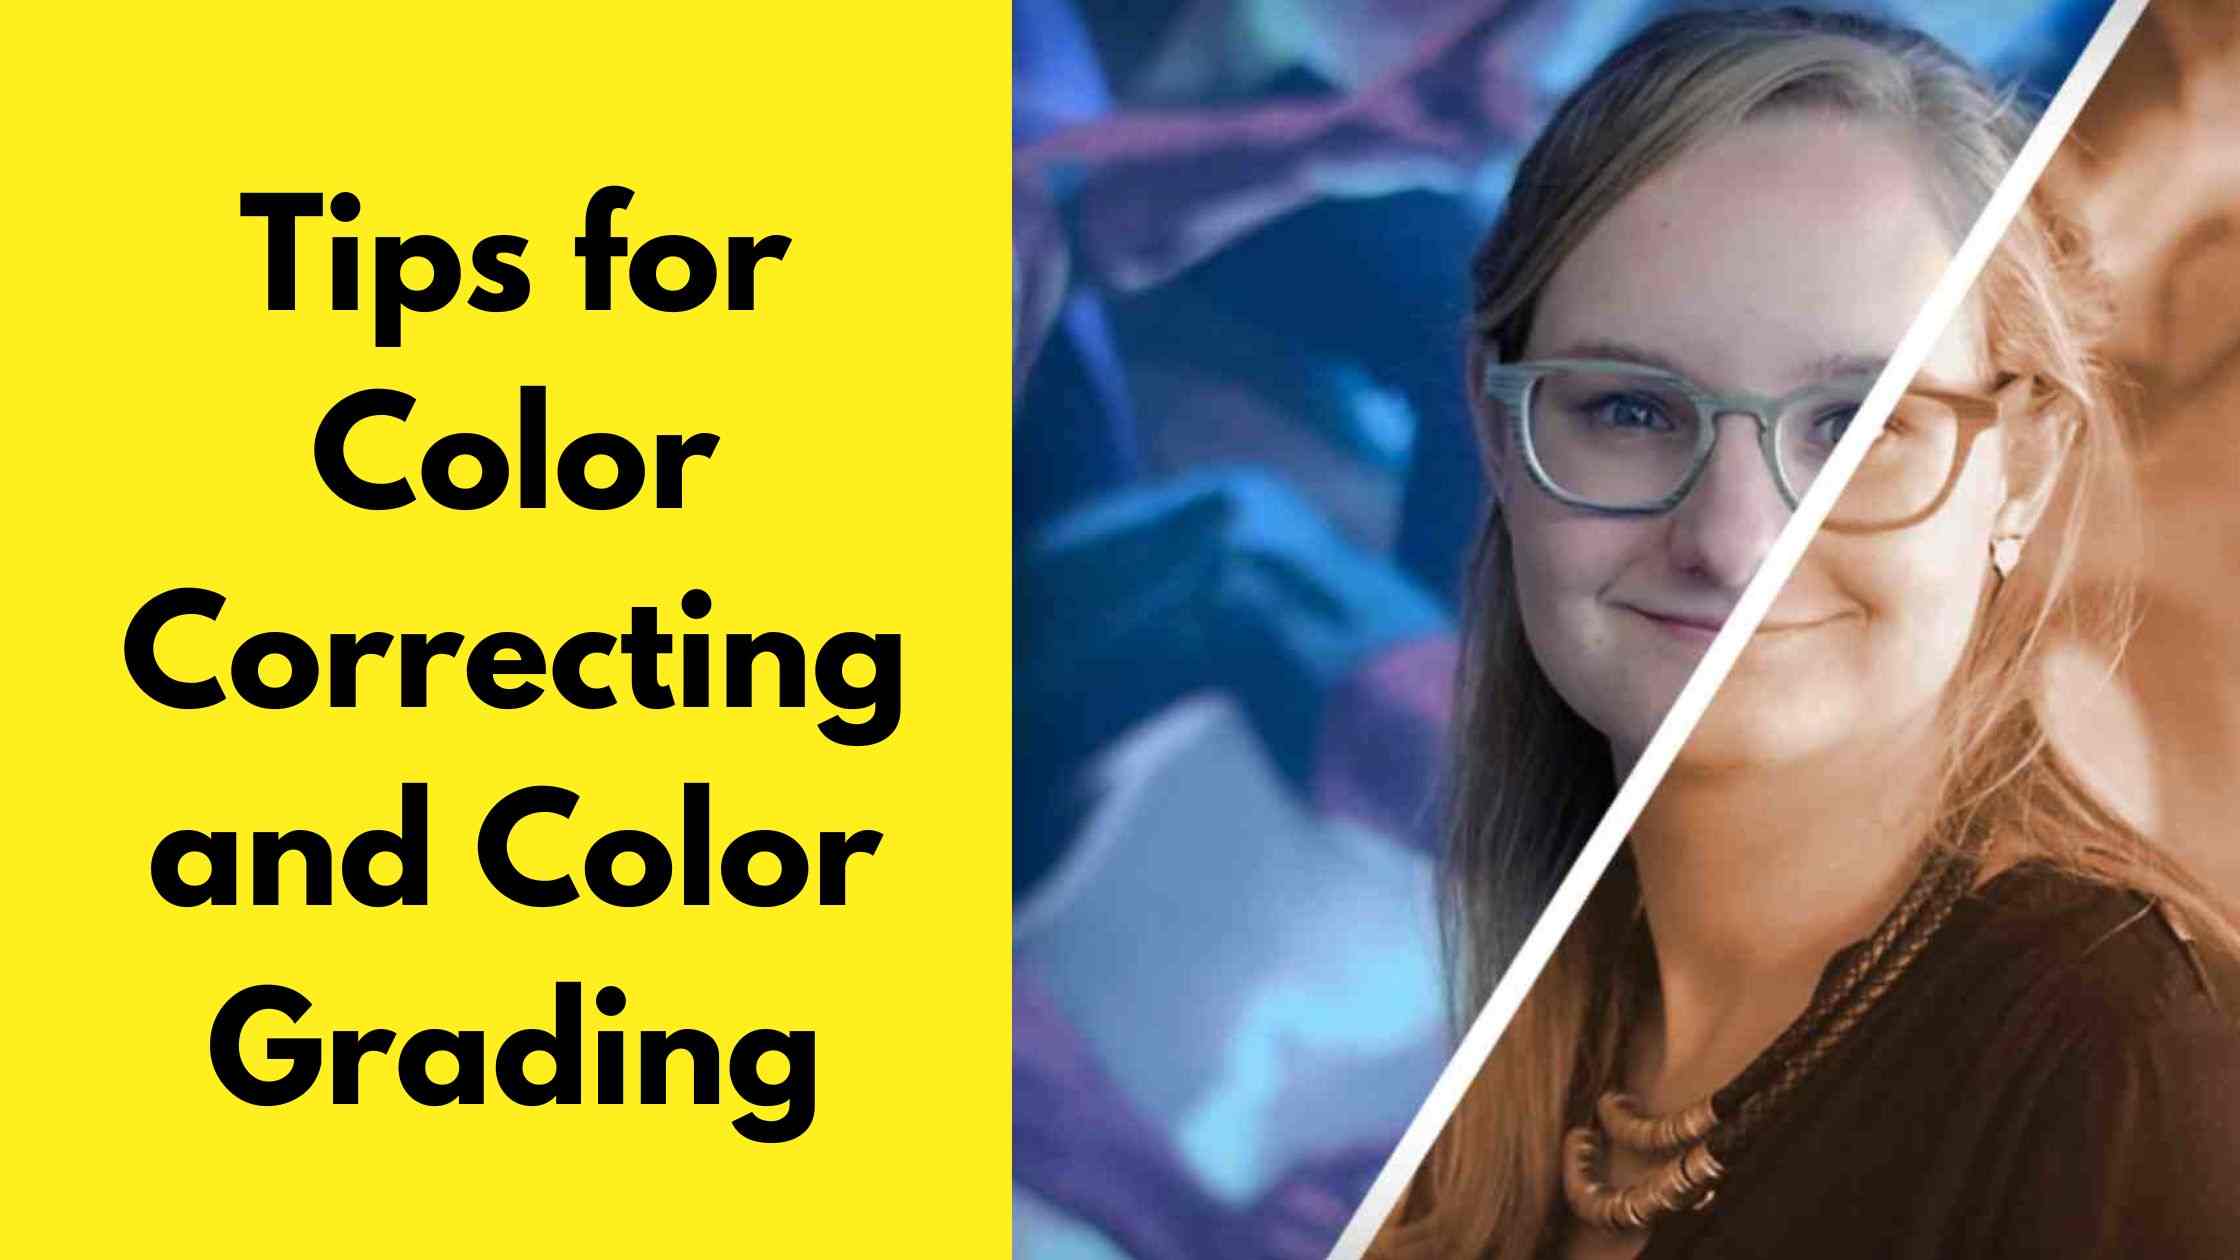 Tips for Color Correcting and Color Grading on Your Phone